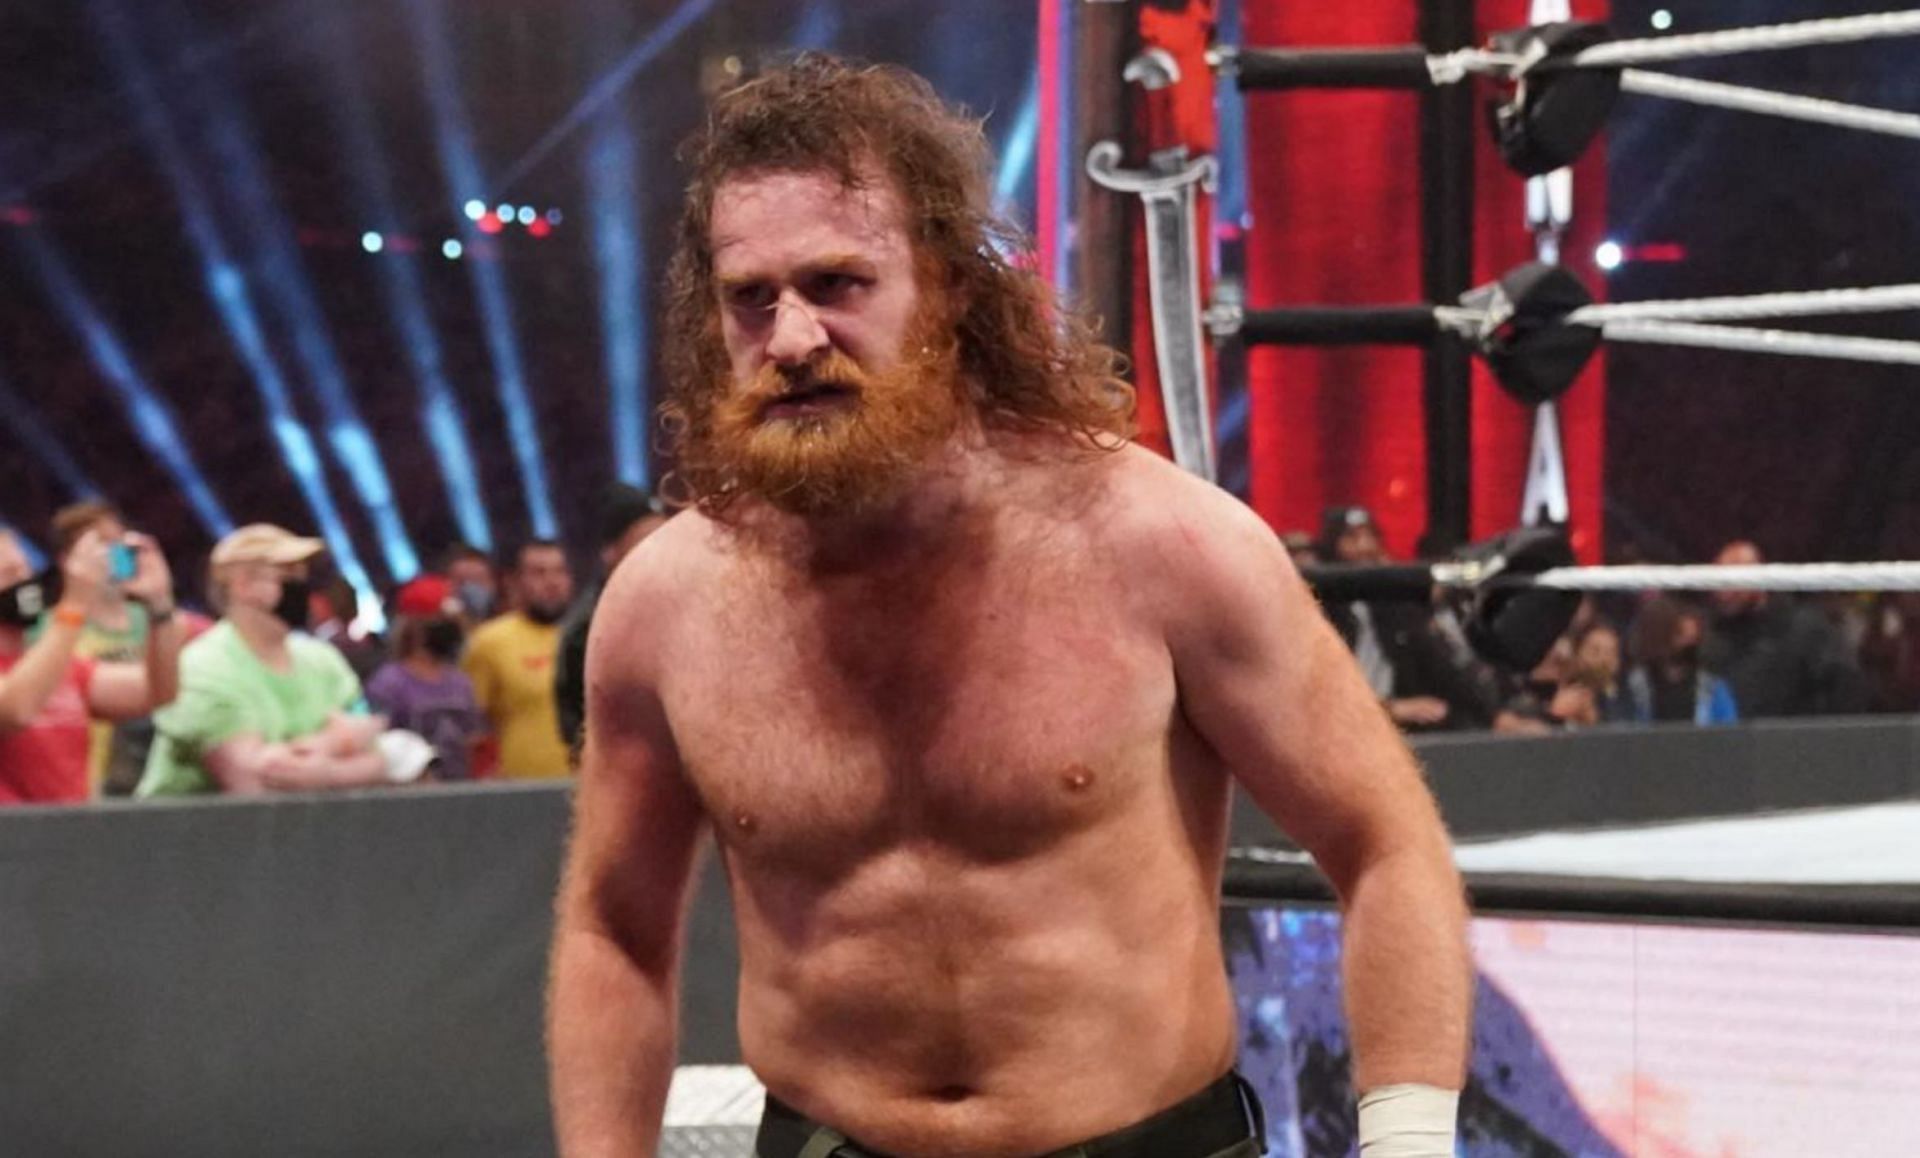 Sami Zayn is scheduled to take on Johnny Knoxville at WrestleMania